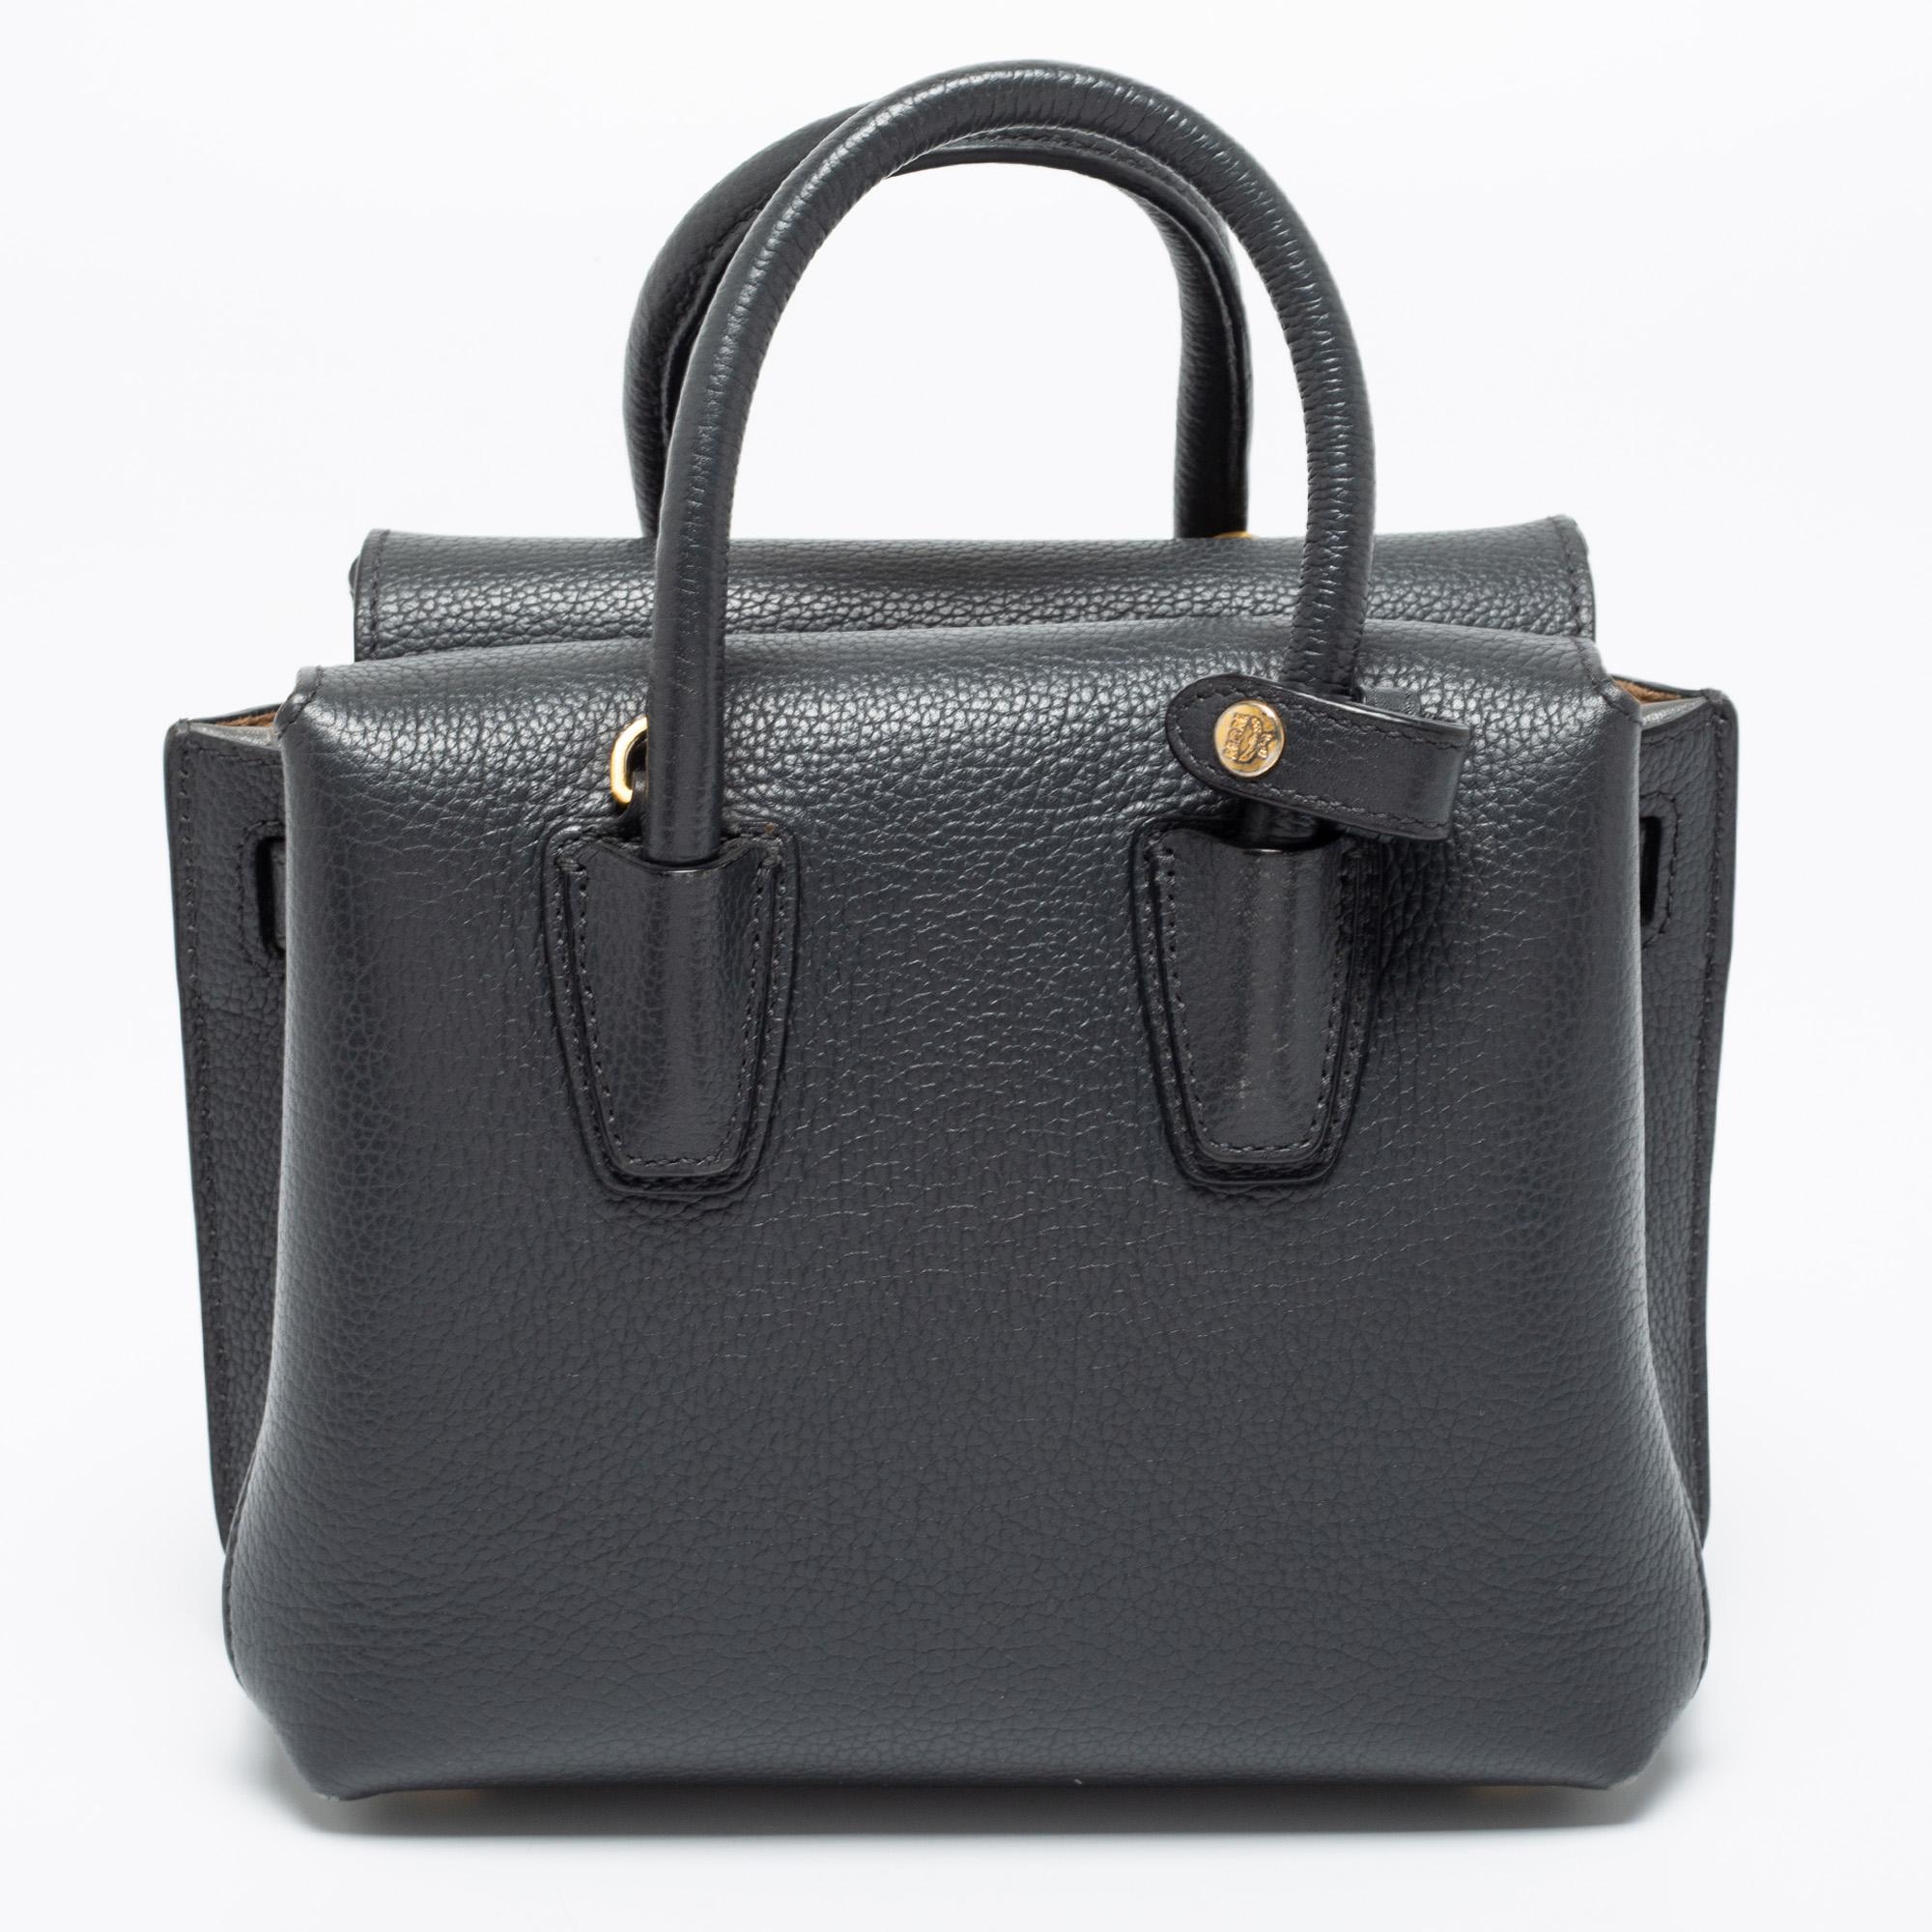 This tote from MCM is fashioned to be a constant pick for when you need a reliable bag that is full of style. It comes with a grey leather exterior and a spacious interior for your essentials.

Includes: Original Dustbag, Detachable Strap
